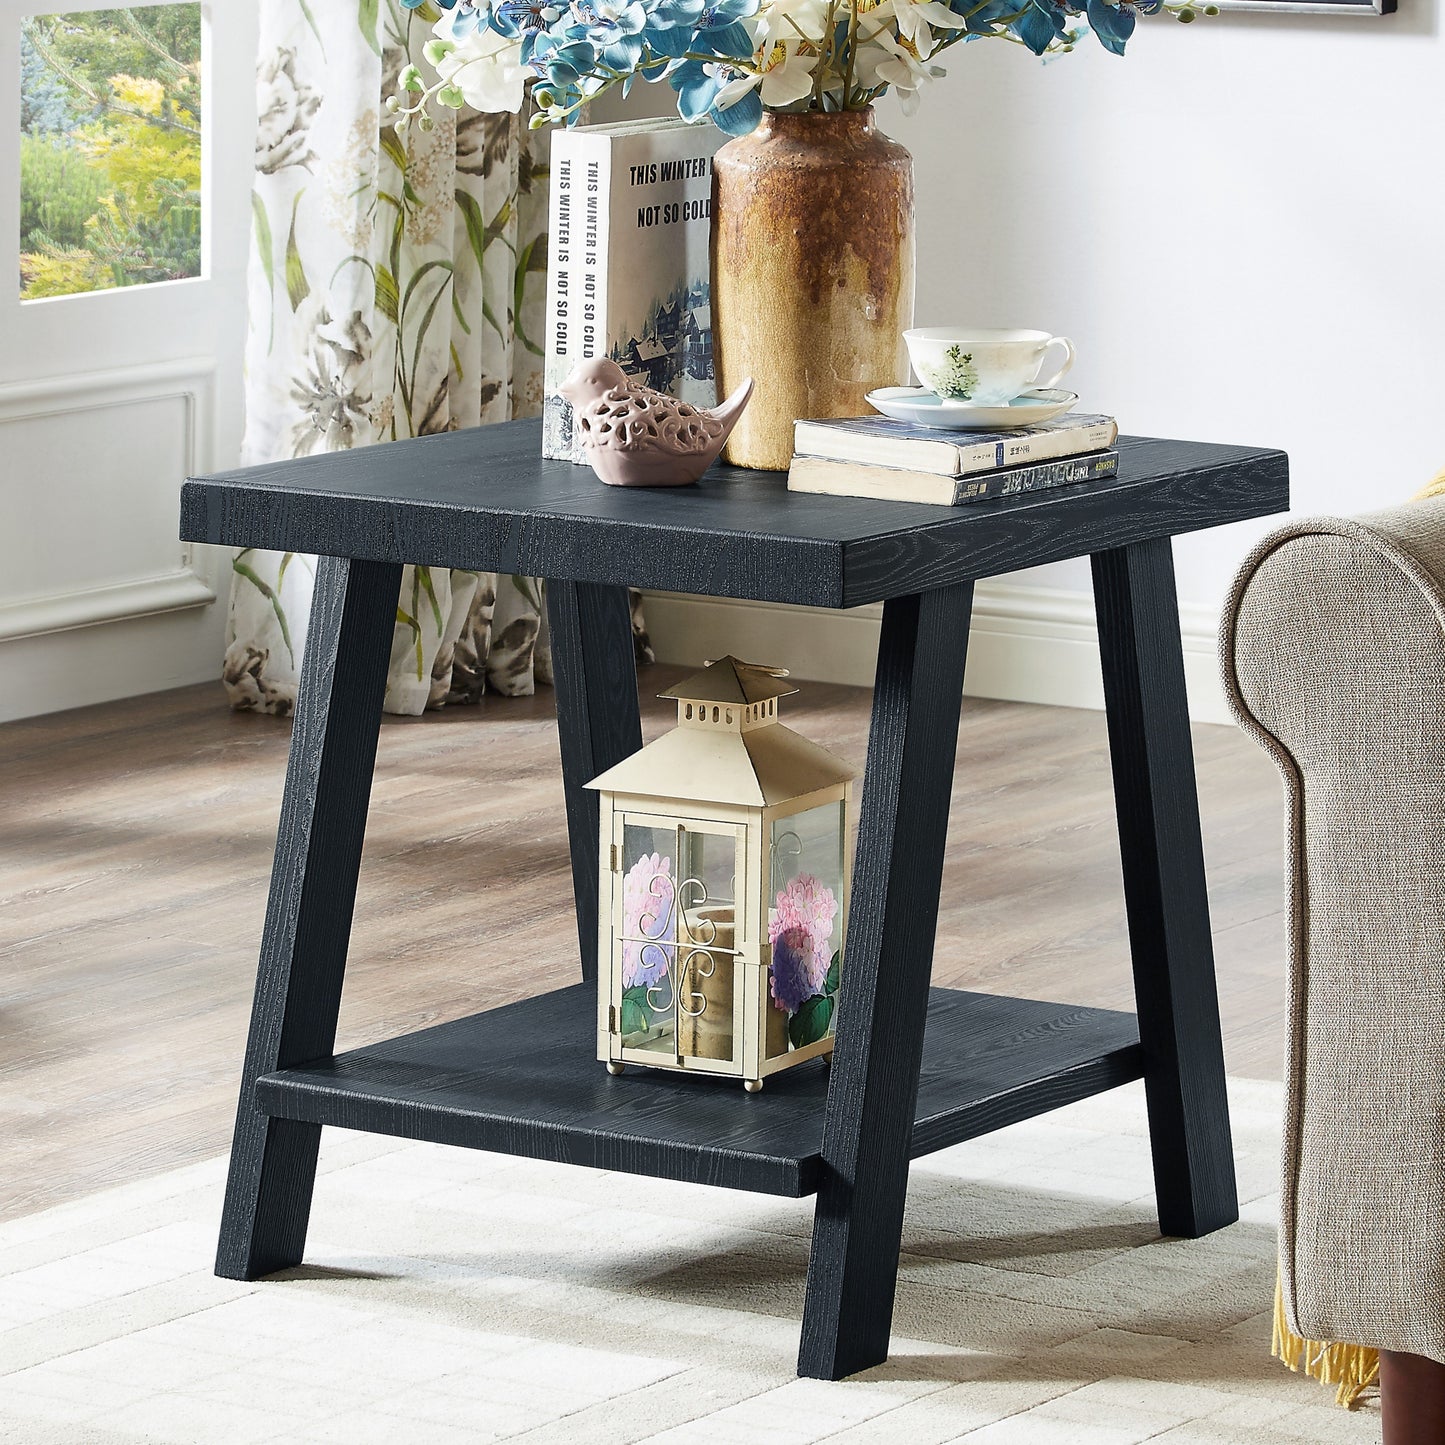 Athens Contemporary Replicated Wood Shelf Coffee Set Table in Black Finish